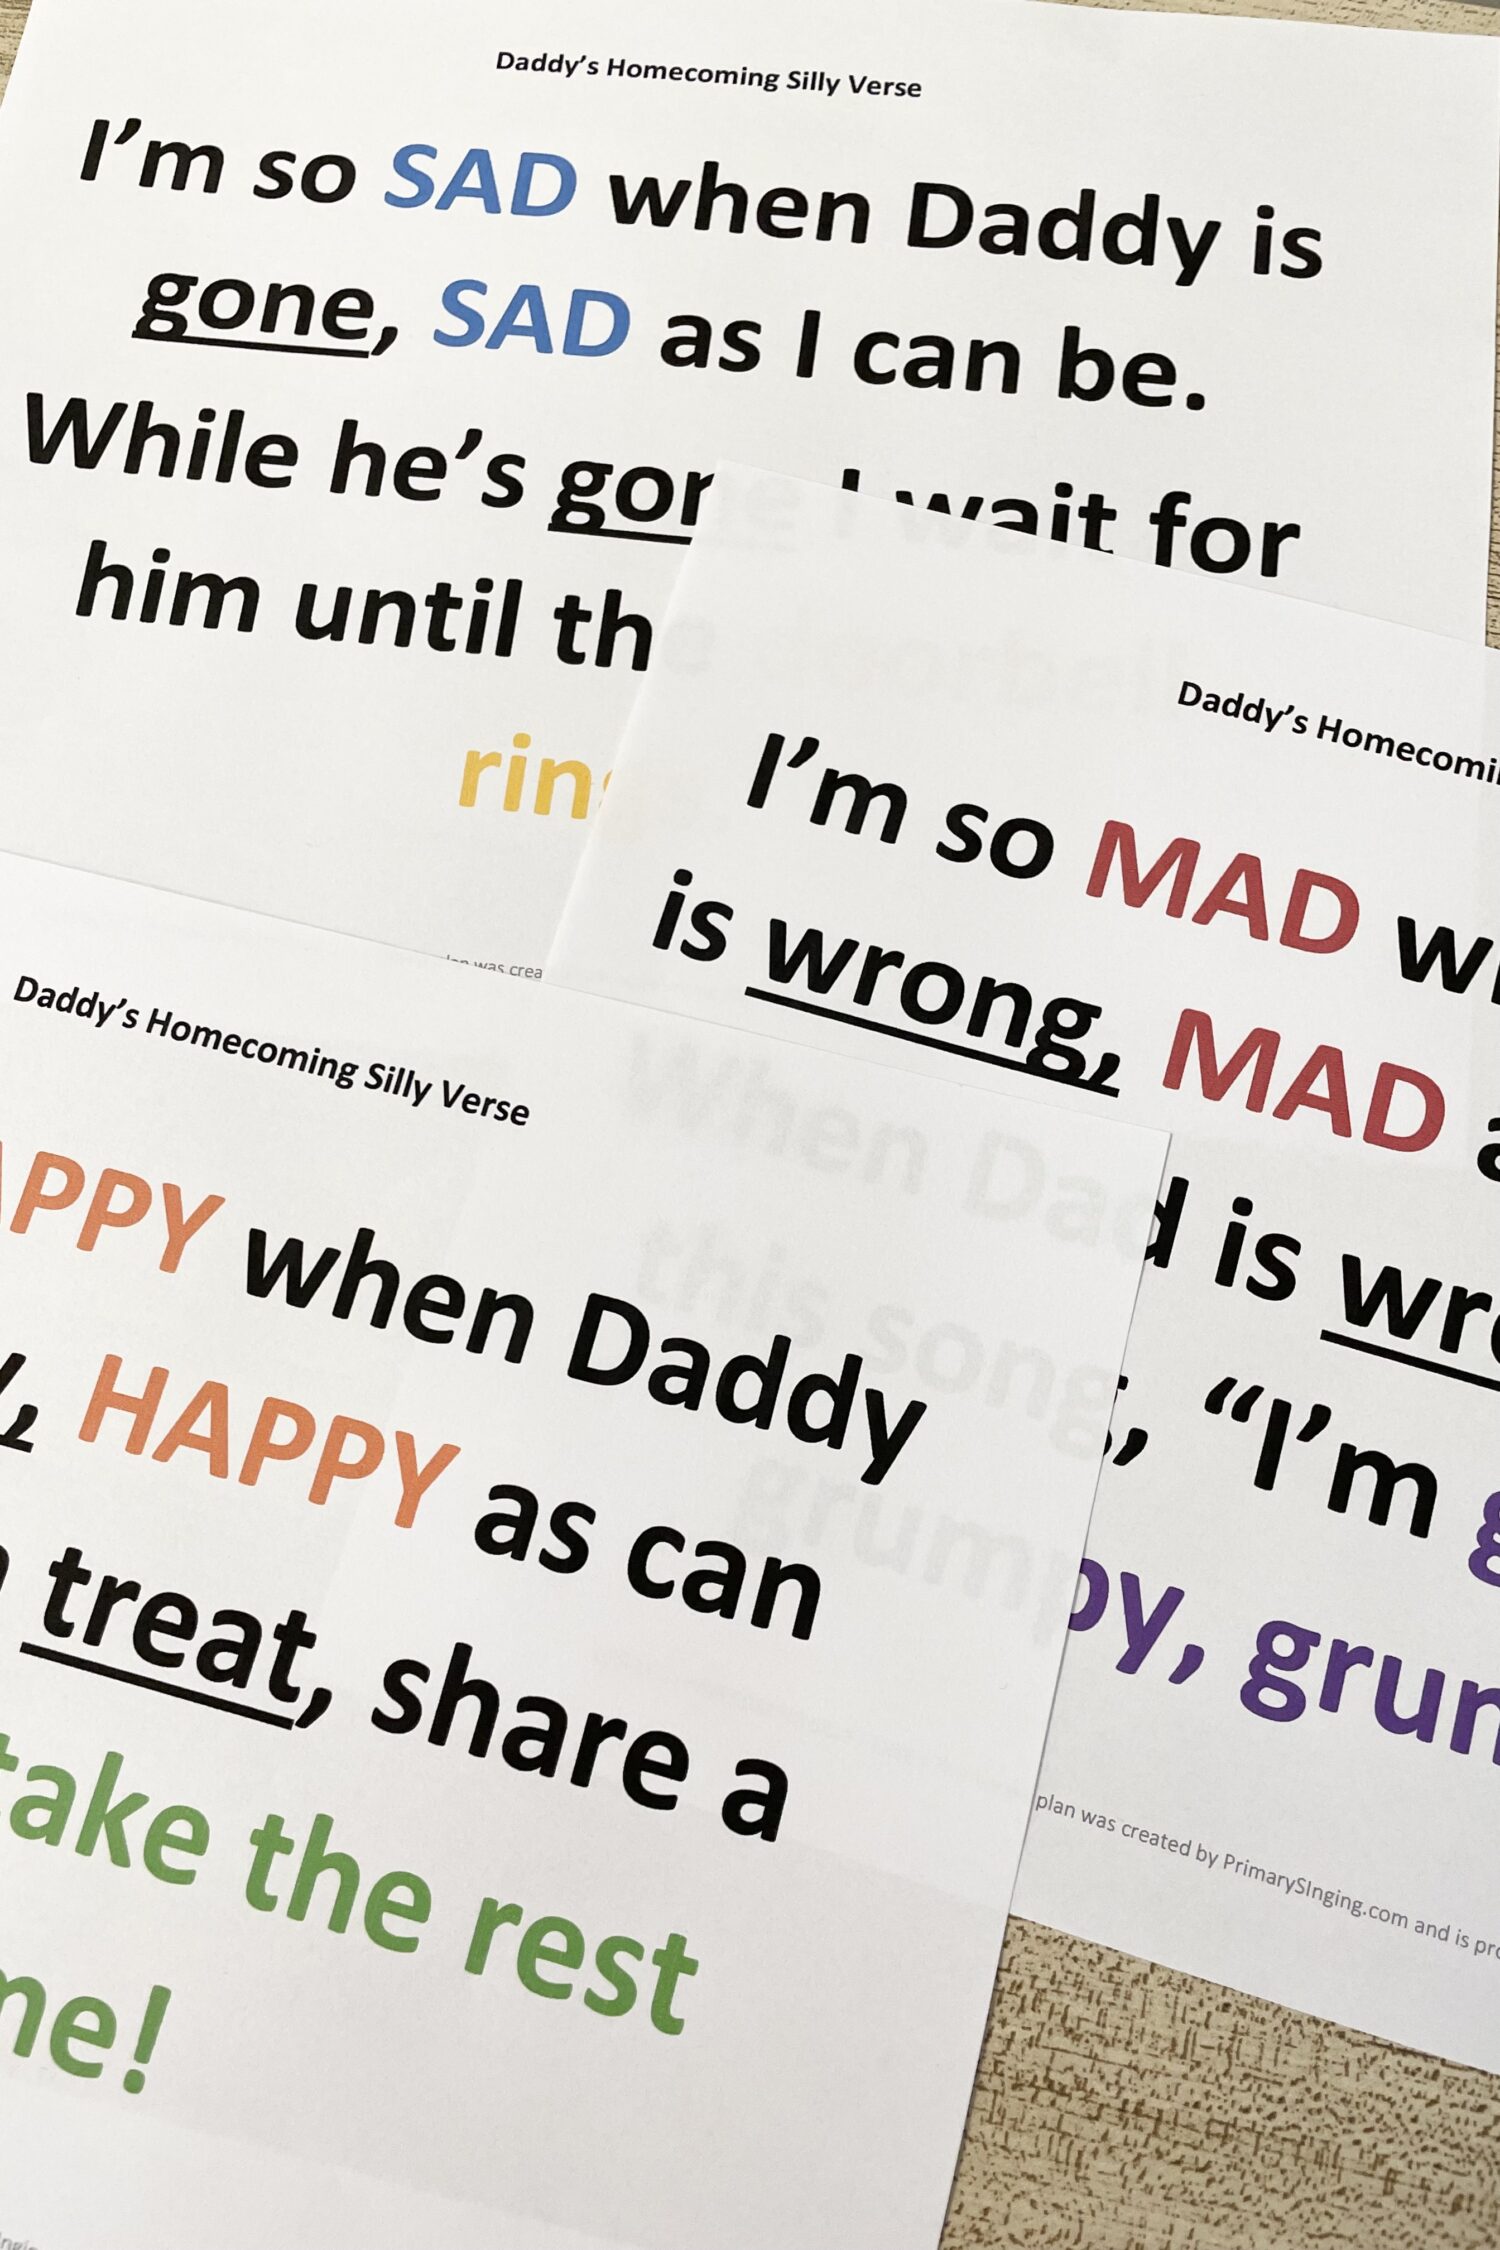 Daddy's Homecoming Silly Verse! Change the lyrics to this Father's Day song with these silly verses with 4 free printable verses for LDS Primary Music Leaders.